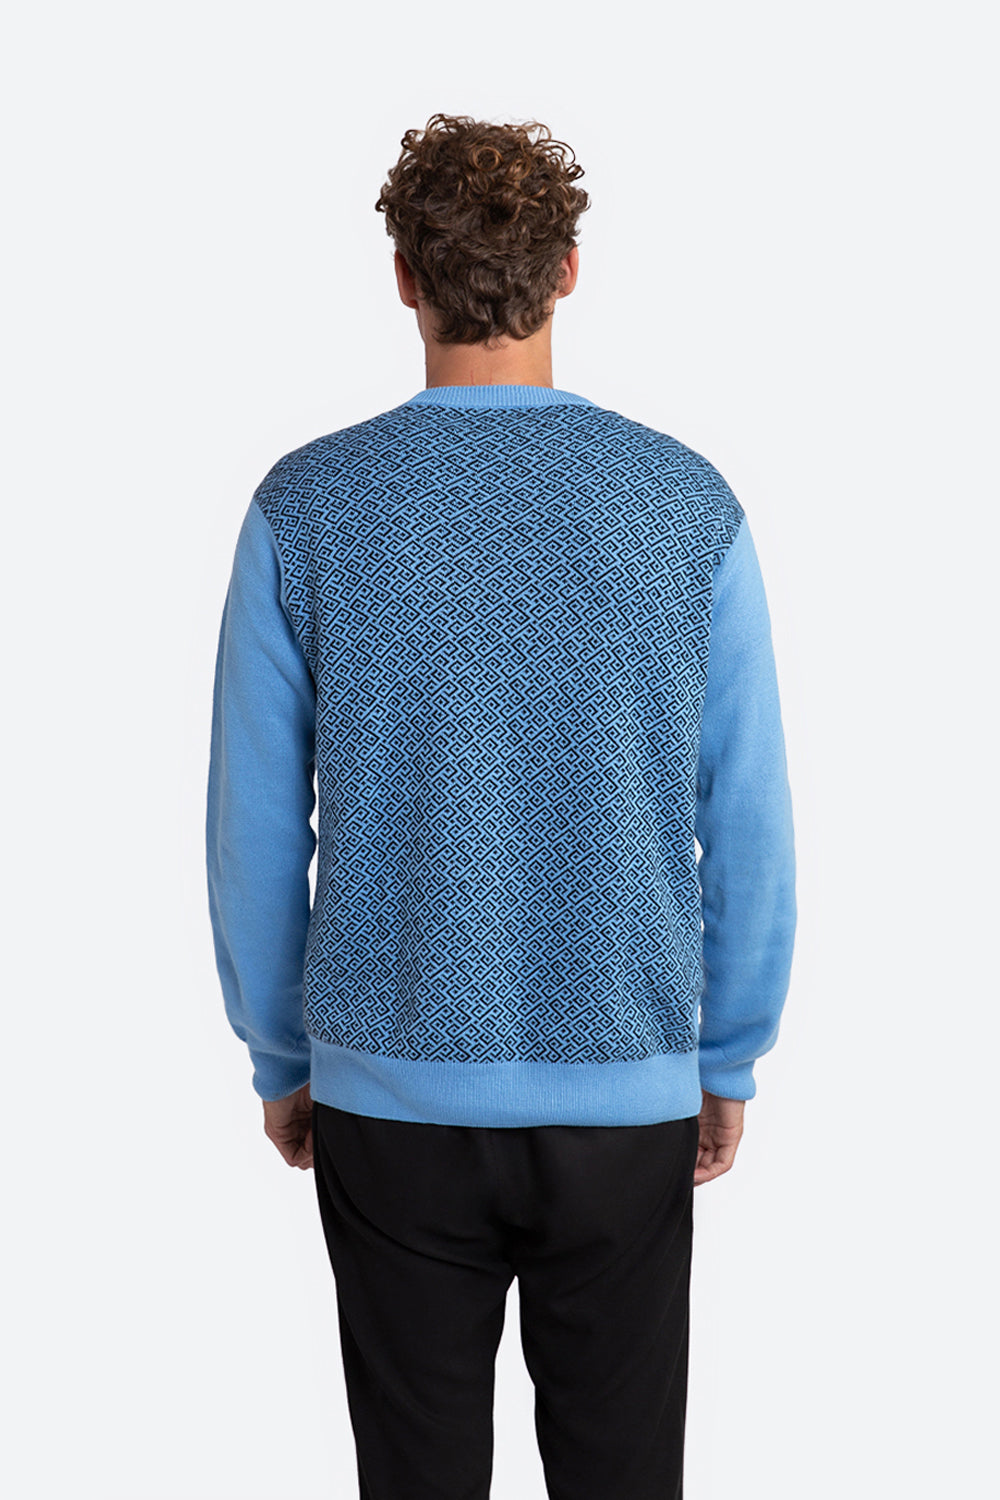 Ivo Cotton Knit Logo Back Sweater in Light Blue and Black